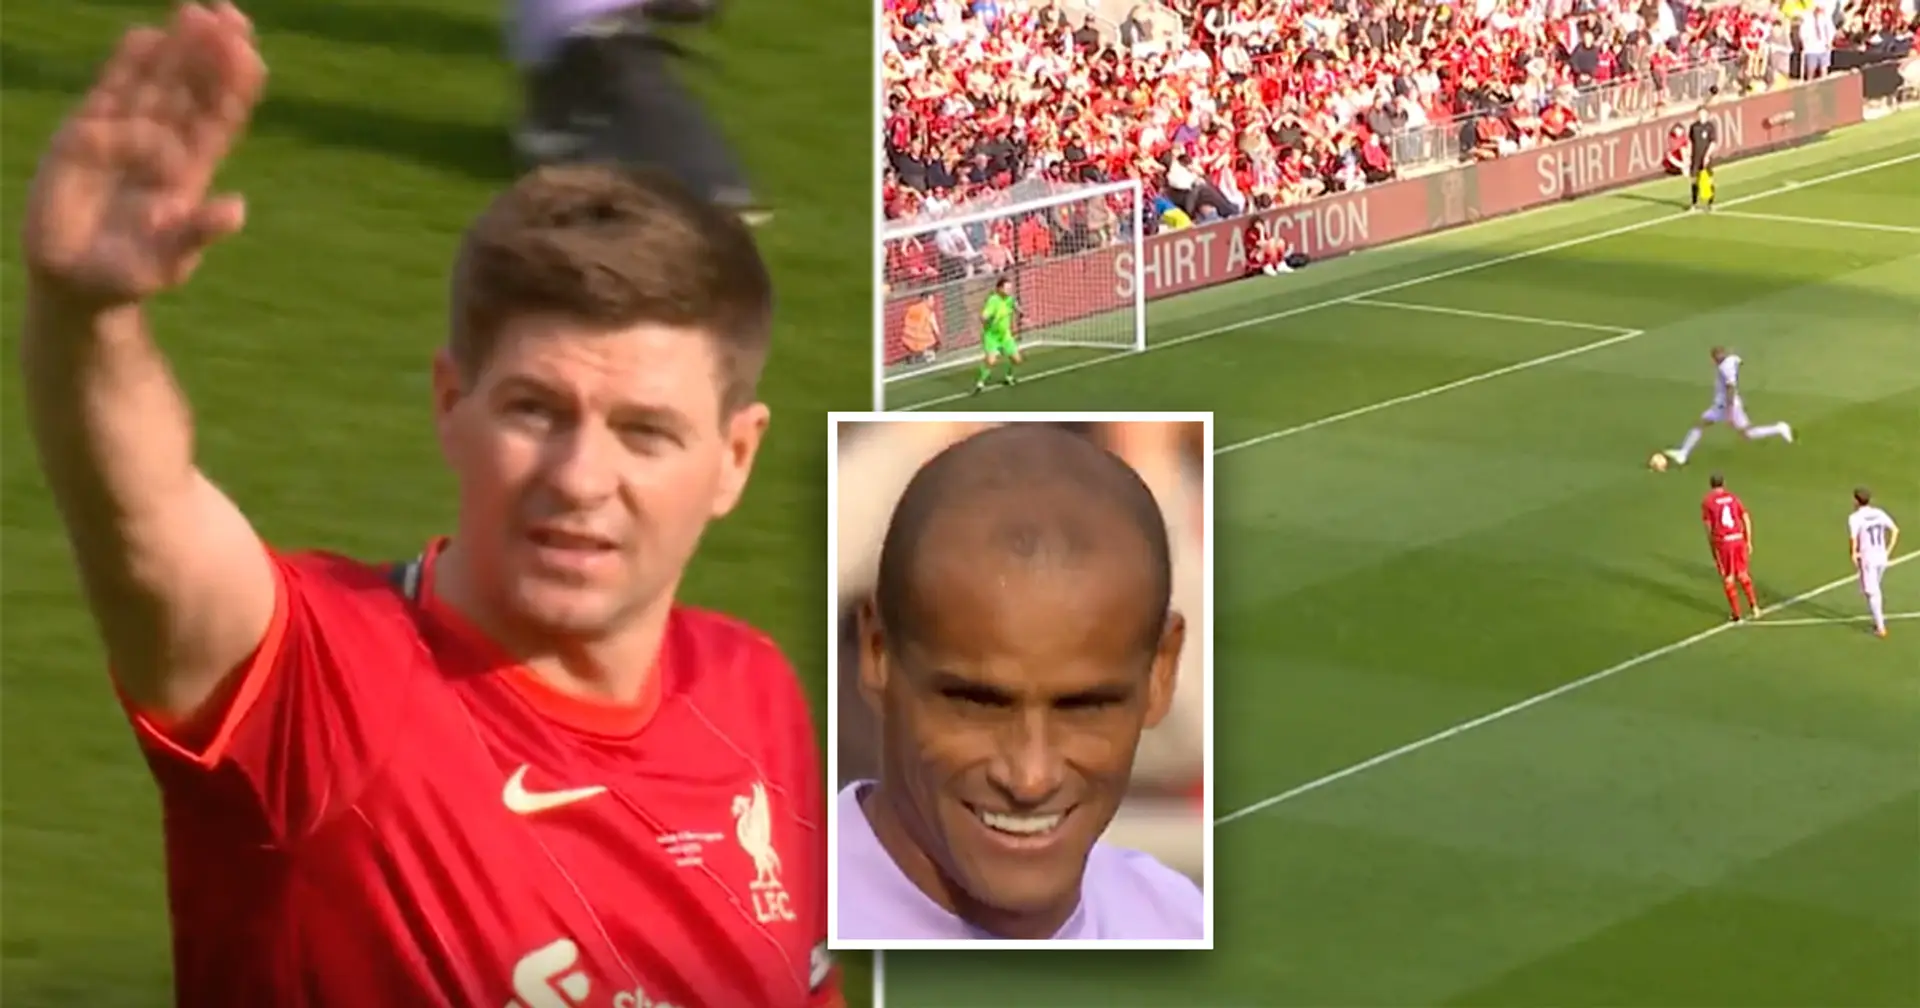 Rivaldo pen impossible to save, Gerrard scores too: Barca legends beat Liverpool legends at Anfield